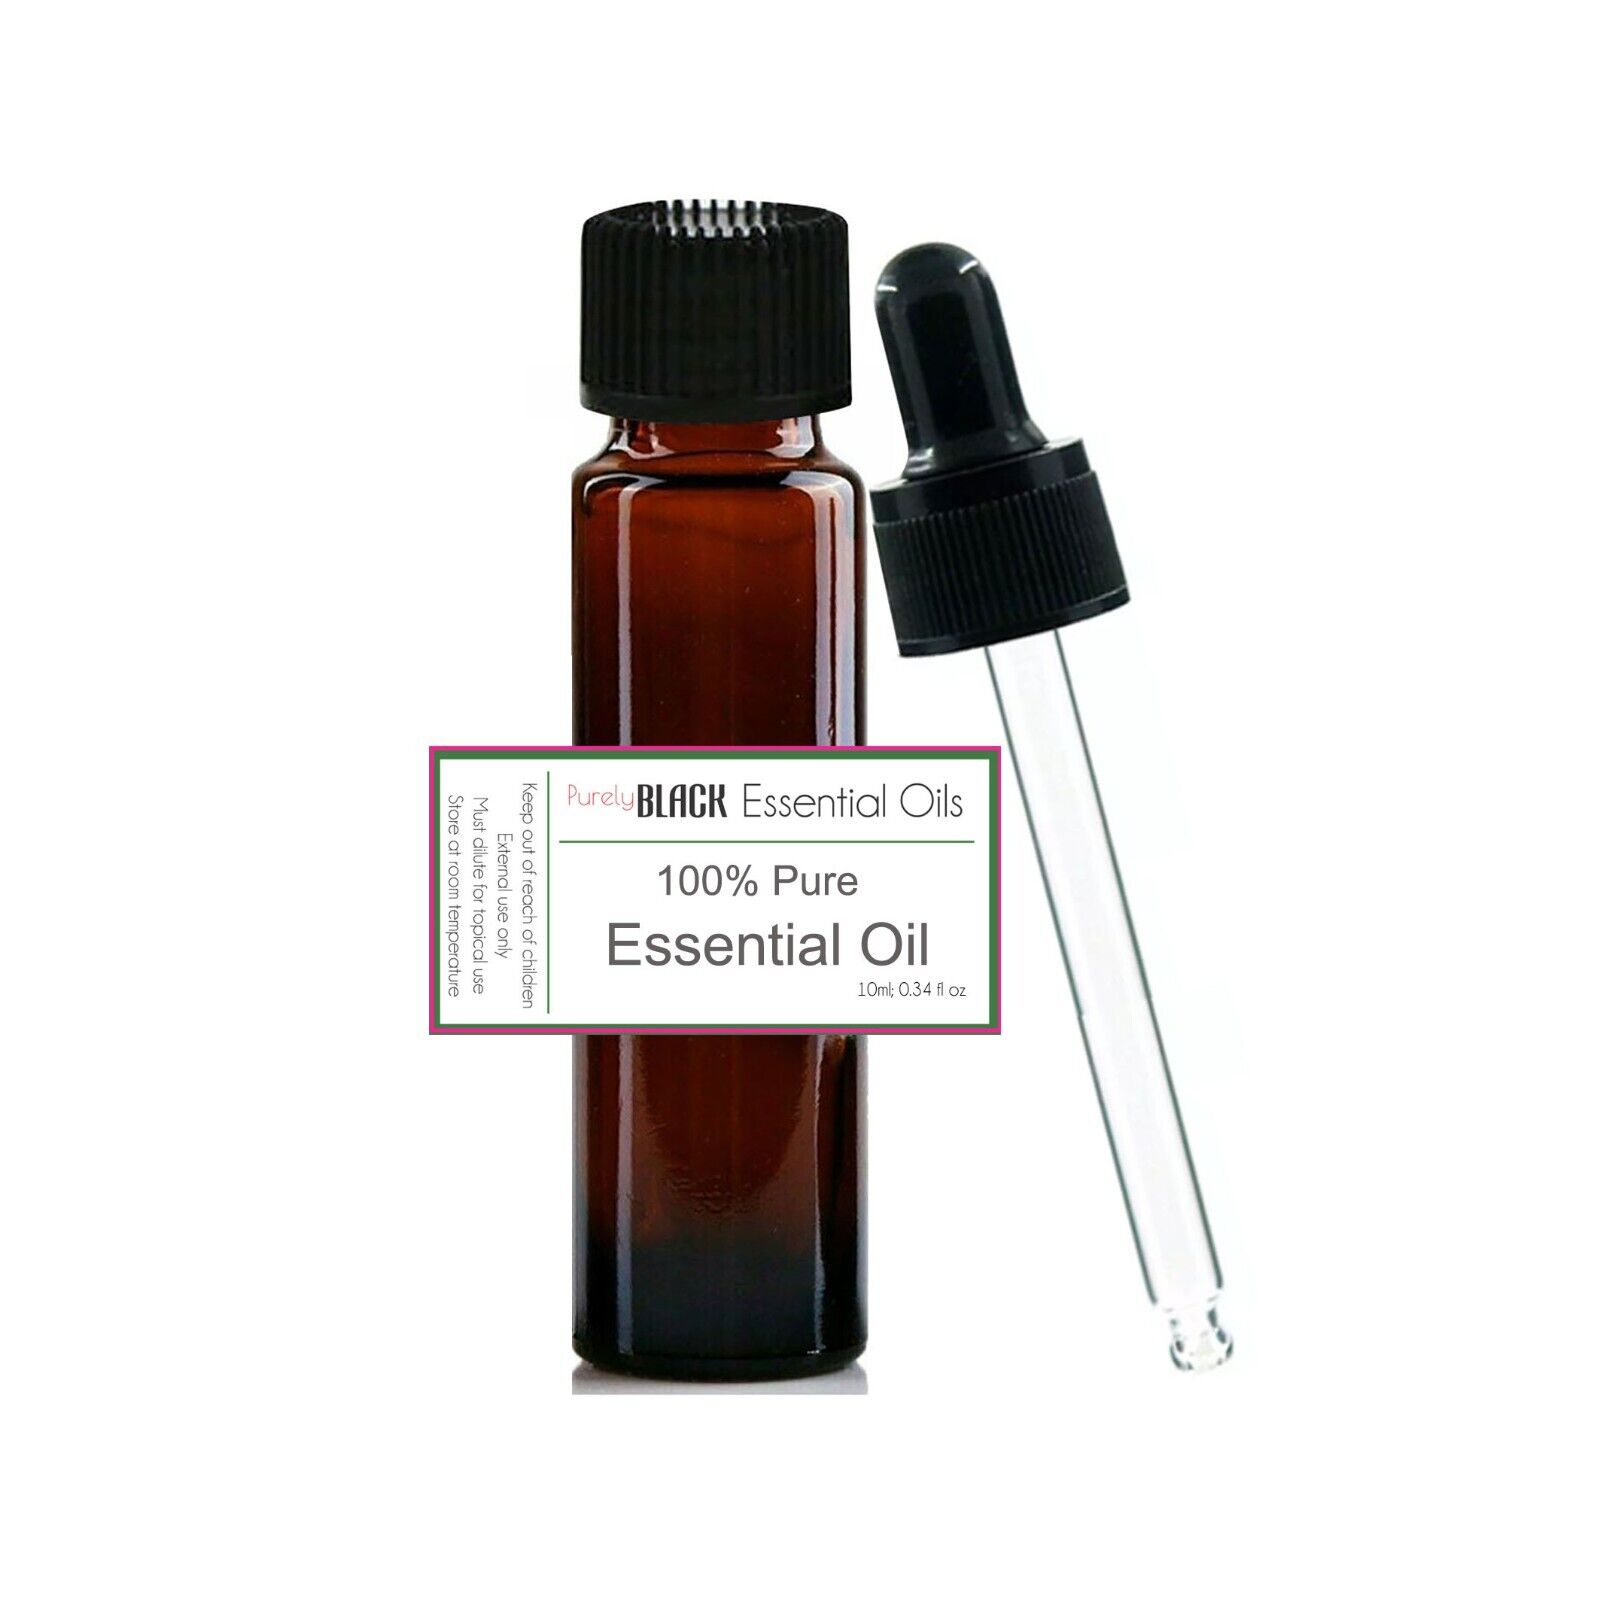 Essential Oil Blend 10ml. Aromatherapy Diffuser Oils